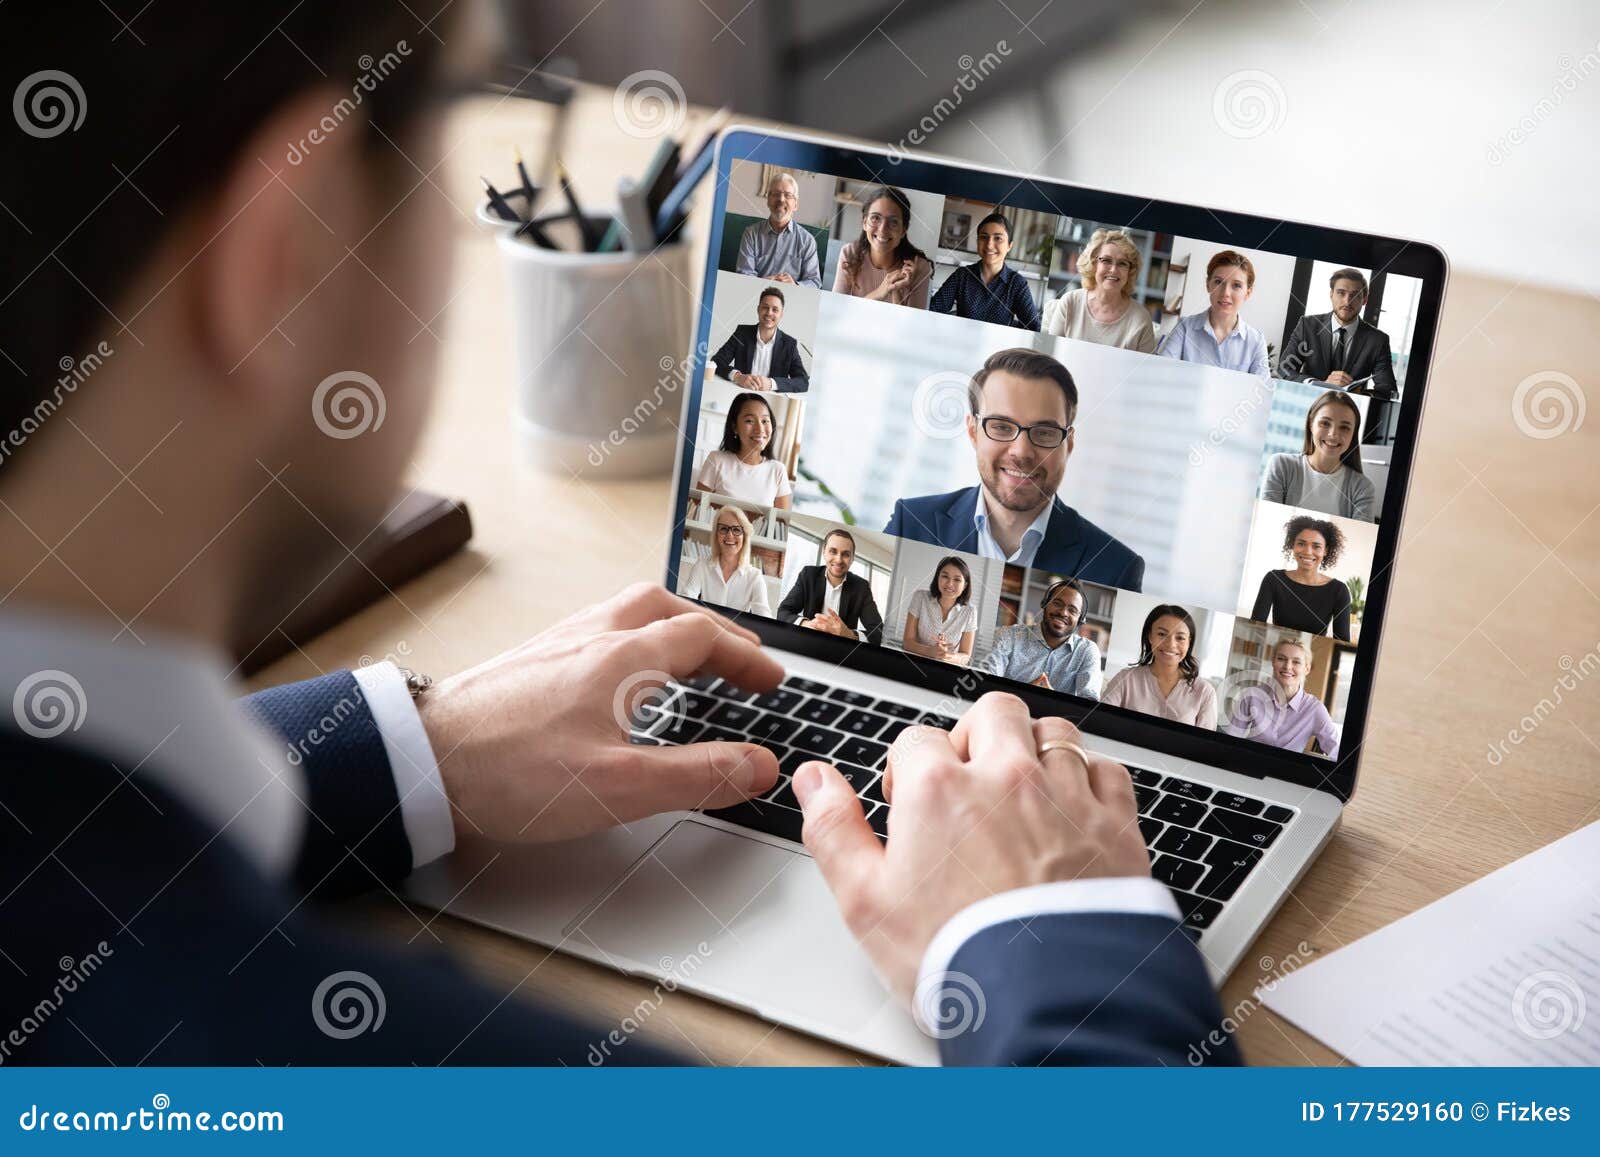 back view of employee have online web conference with colleagues